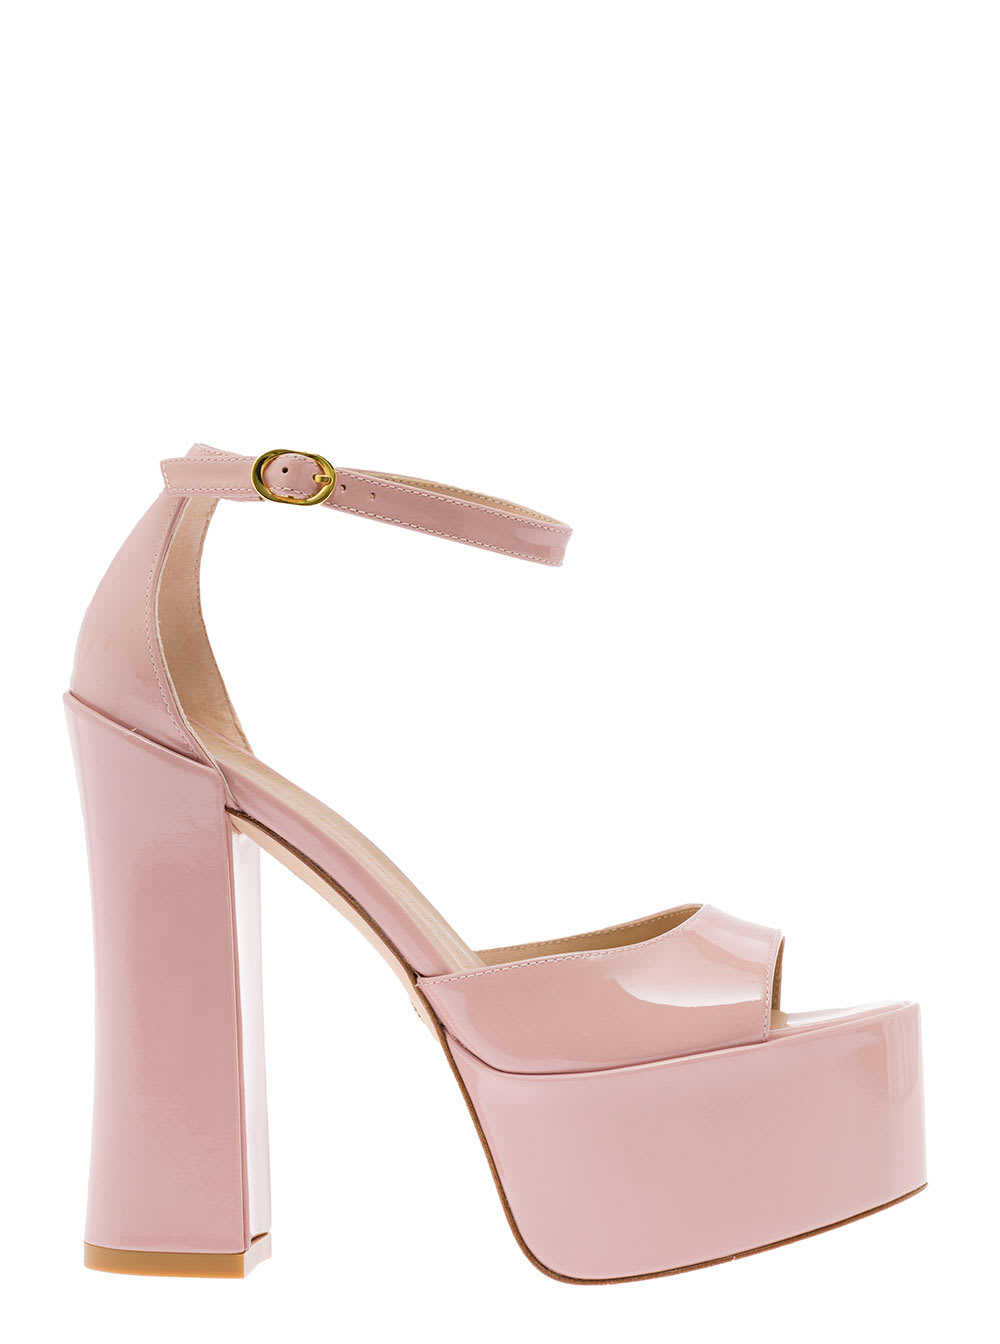 STUART WEITZMAN SKYHIGH PINK SANDALS WITH BLOCK HEEL AND PLATFORM IN PATENT LEATHER WOMAN